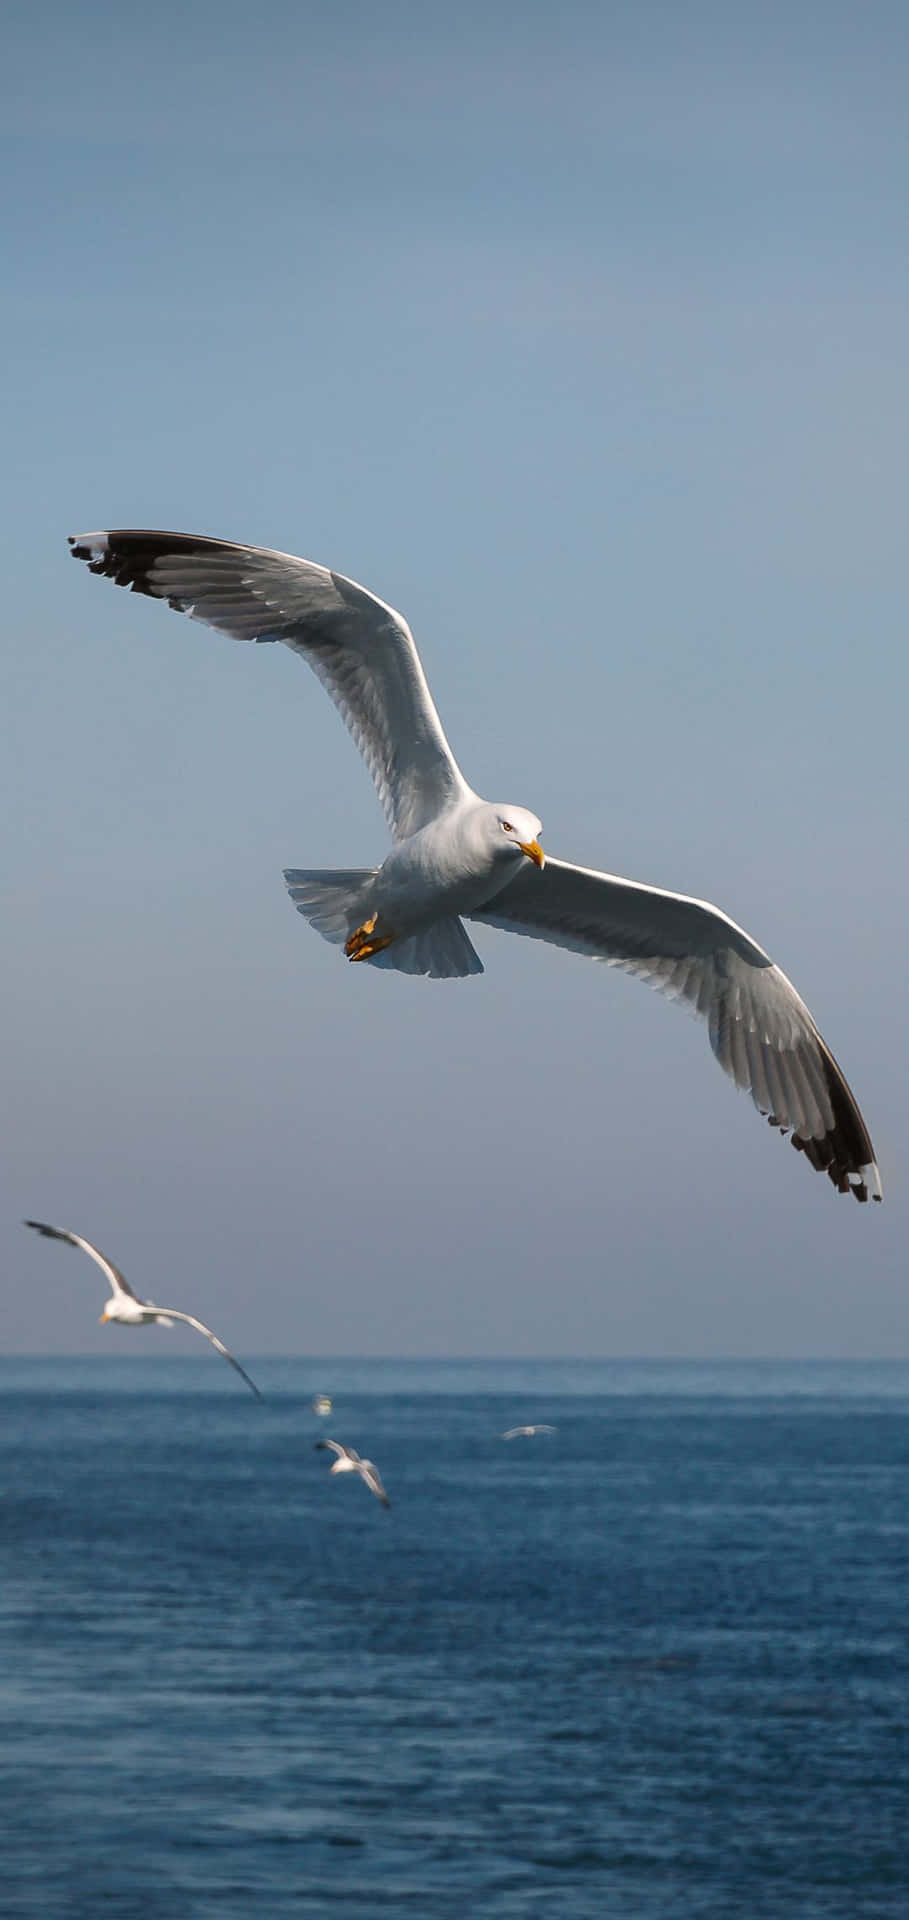 Majestic Seagull Soaring Over The Ocean